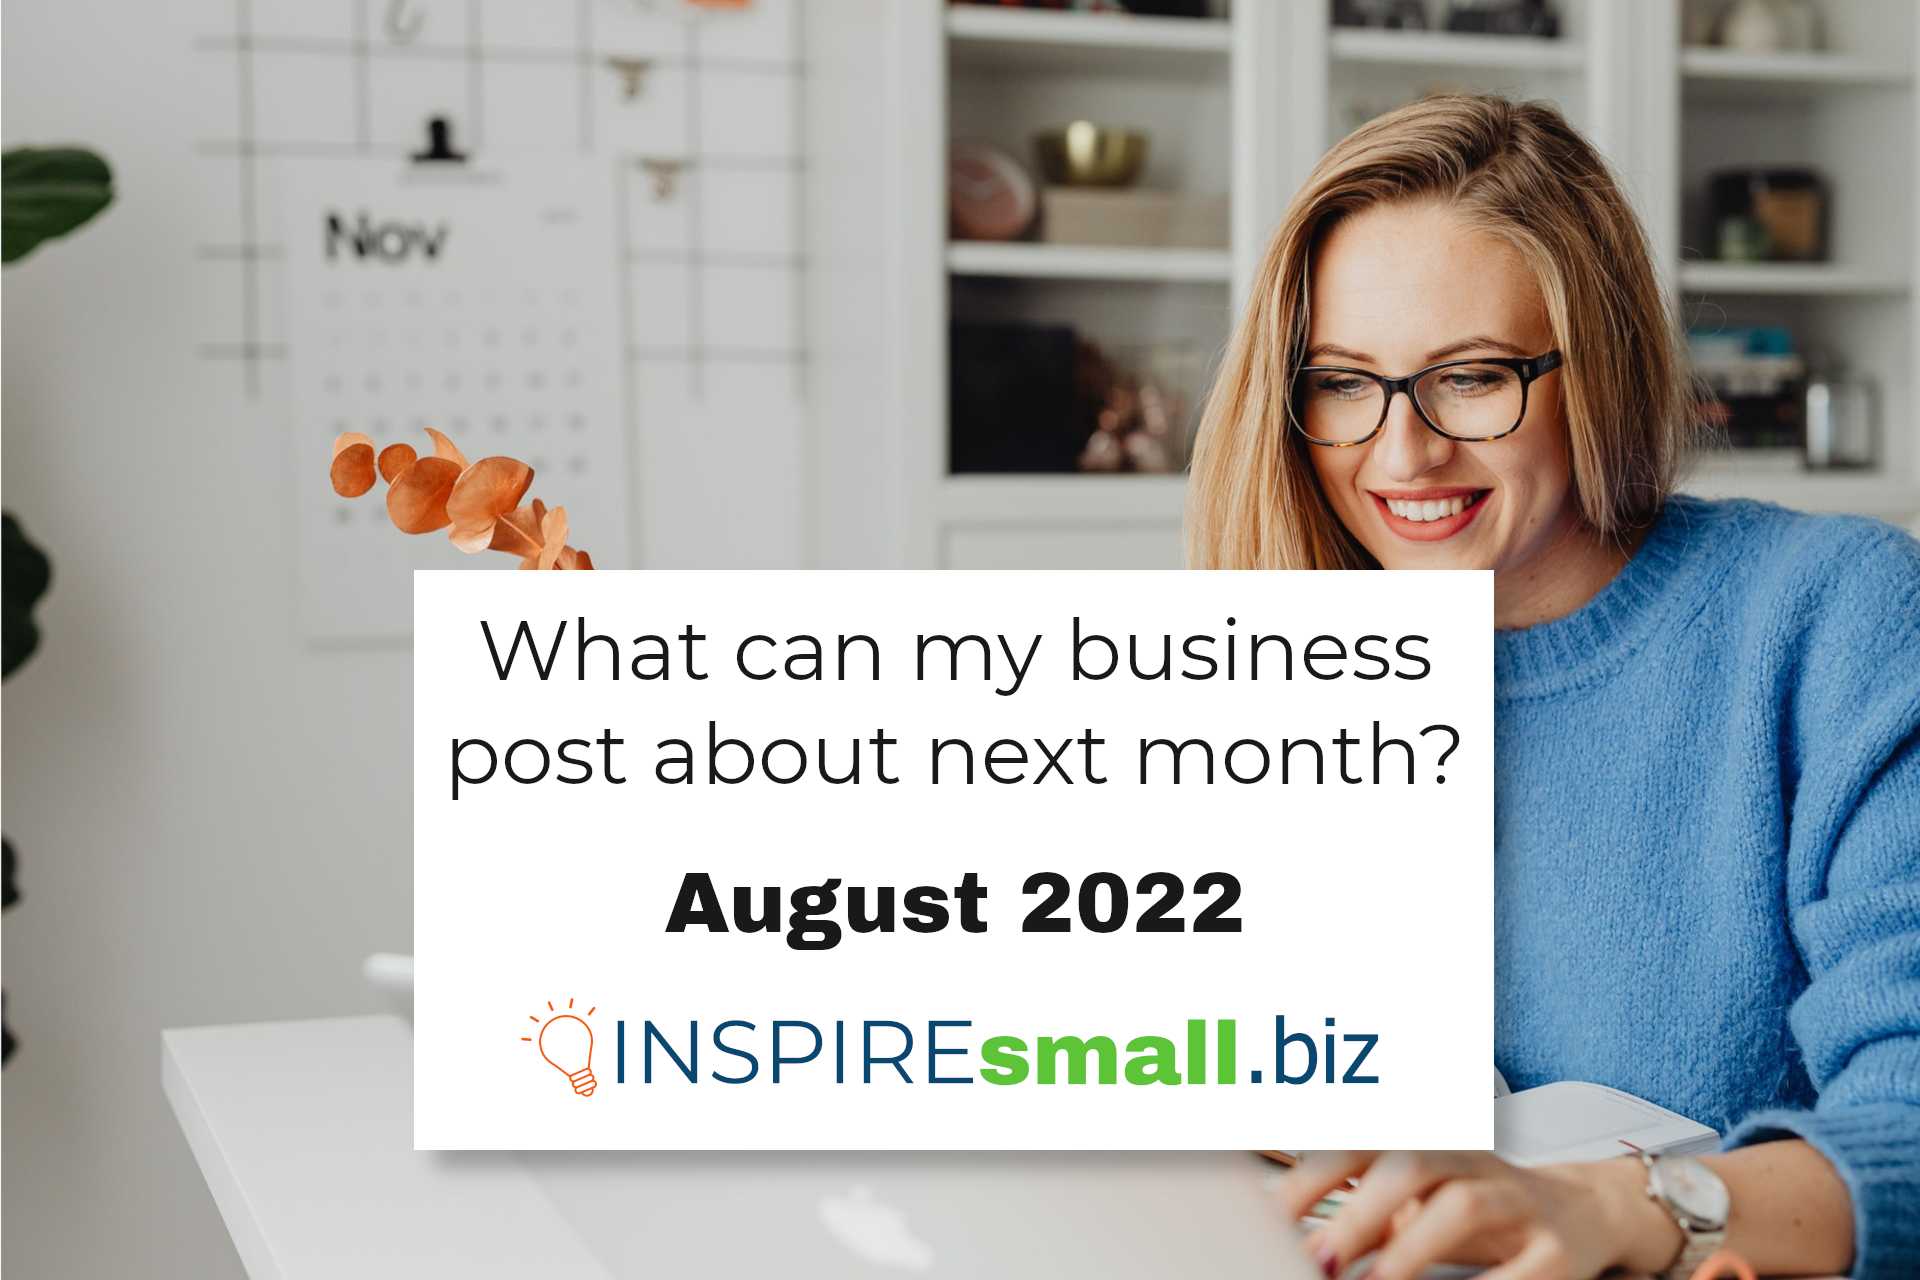 What can my business post about next month? August 2022